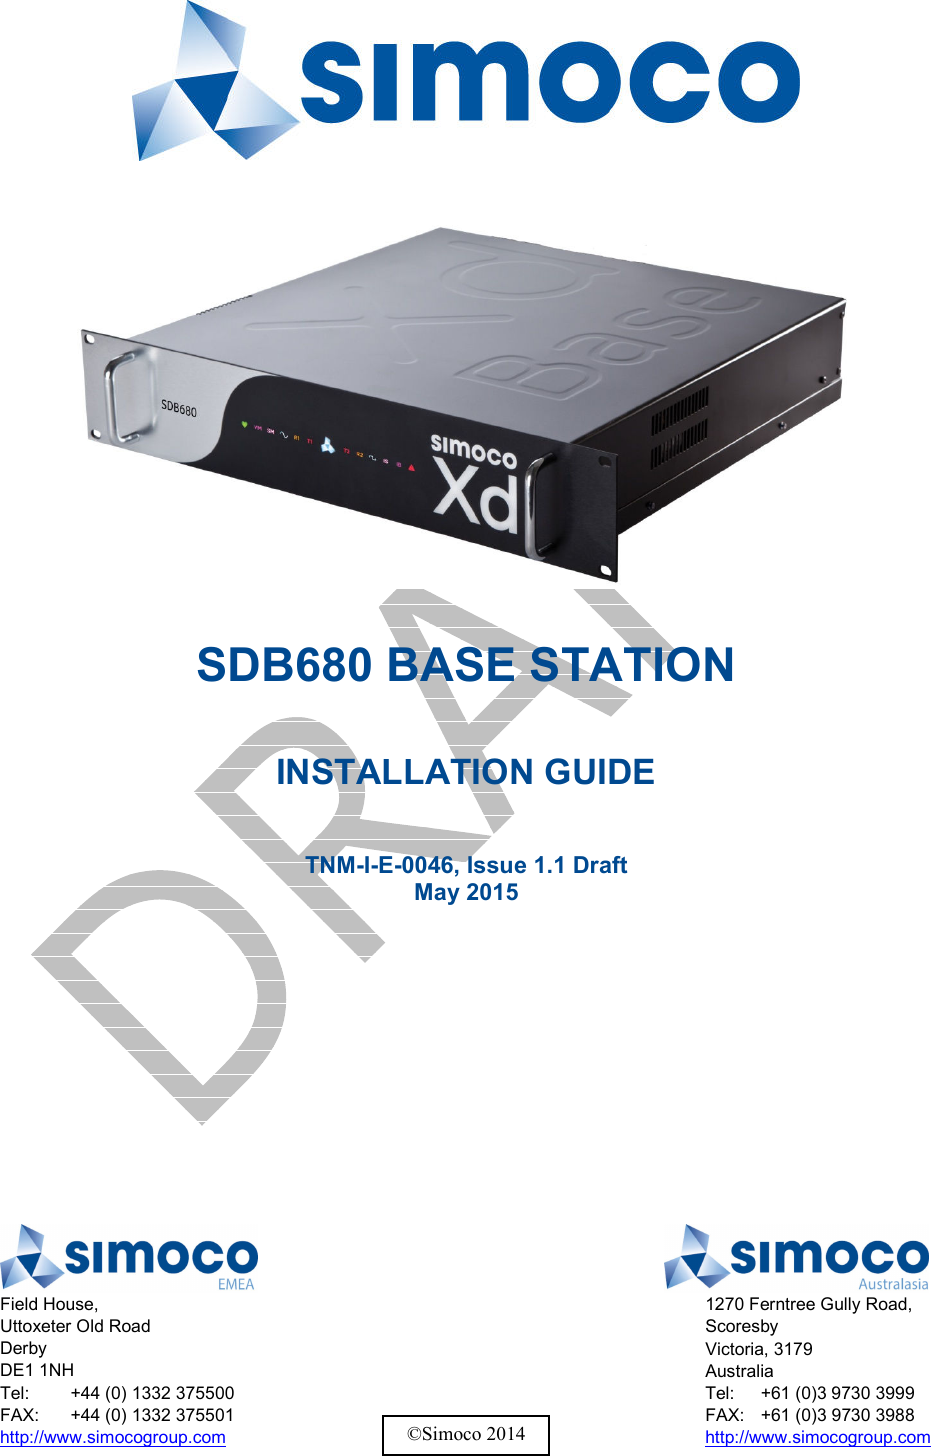     SDB680 BASE STATION  INSTALLATION GUIDE  TNM-I-E-0046, Issue 1.1 Draft May 2015     Field House, Uttoxeter Old Road Derby DE1 1NH Tel:  +44 (0) 1332 375500 FAX:  +44 (0) 1332 375501 http://www.simocogroup.com  1270 Ferntree Gully Road, Scoresby Victoria, 3179 Australia Tel:  +61 (0)3 9730 3999 FAX:  +61 (0)3 9730 3988 http://www.simocogroup.com ©Simoco 2014 